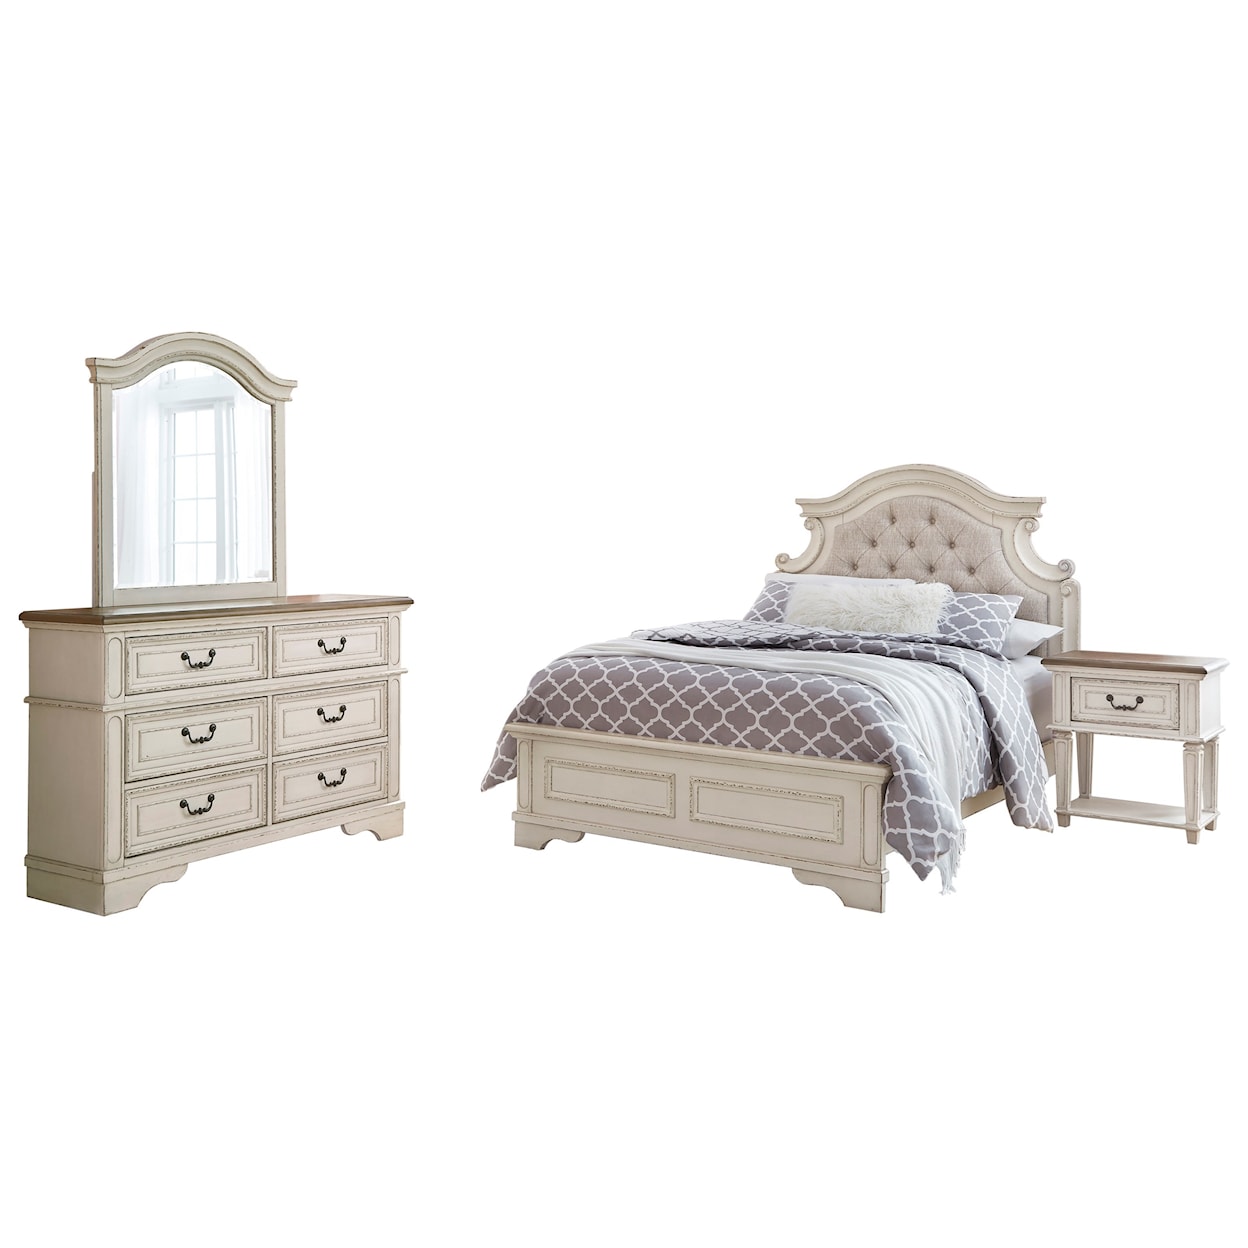 Signature Design by Ashley Realyn California King Bedroom Group